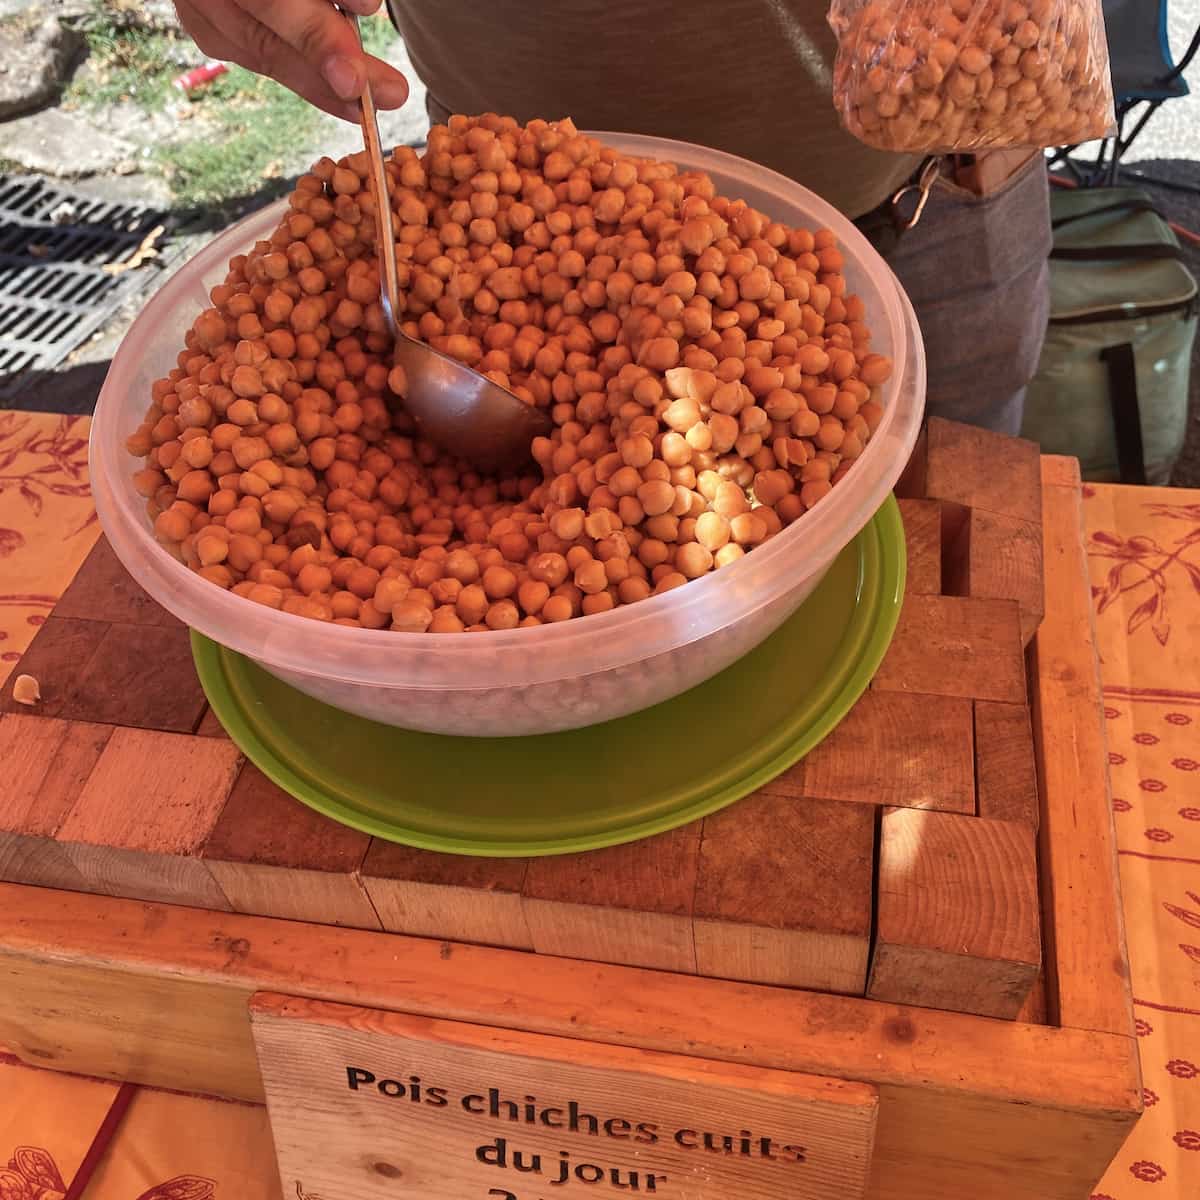 chickpeas at the market